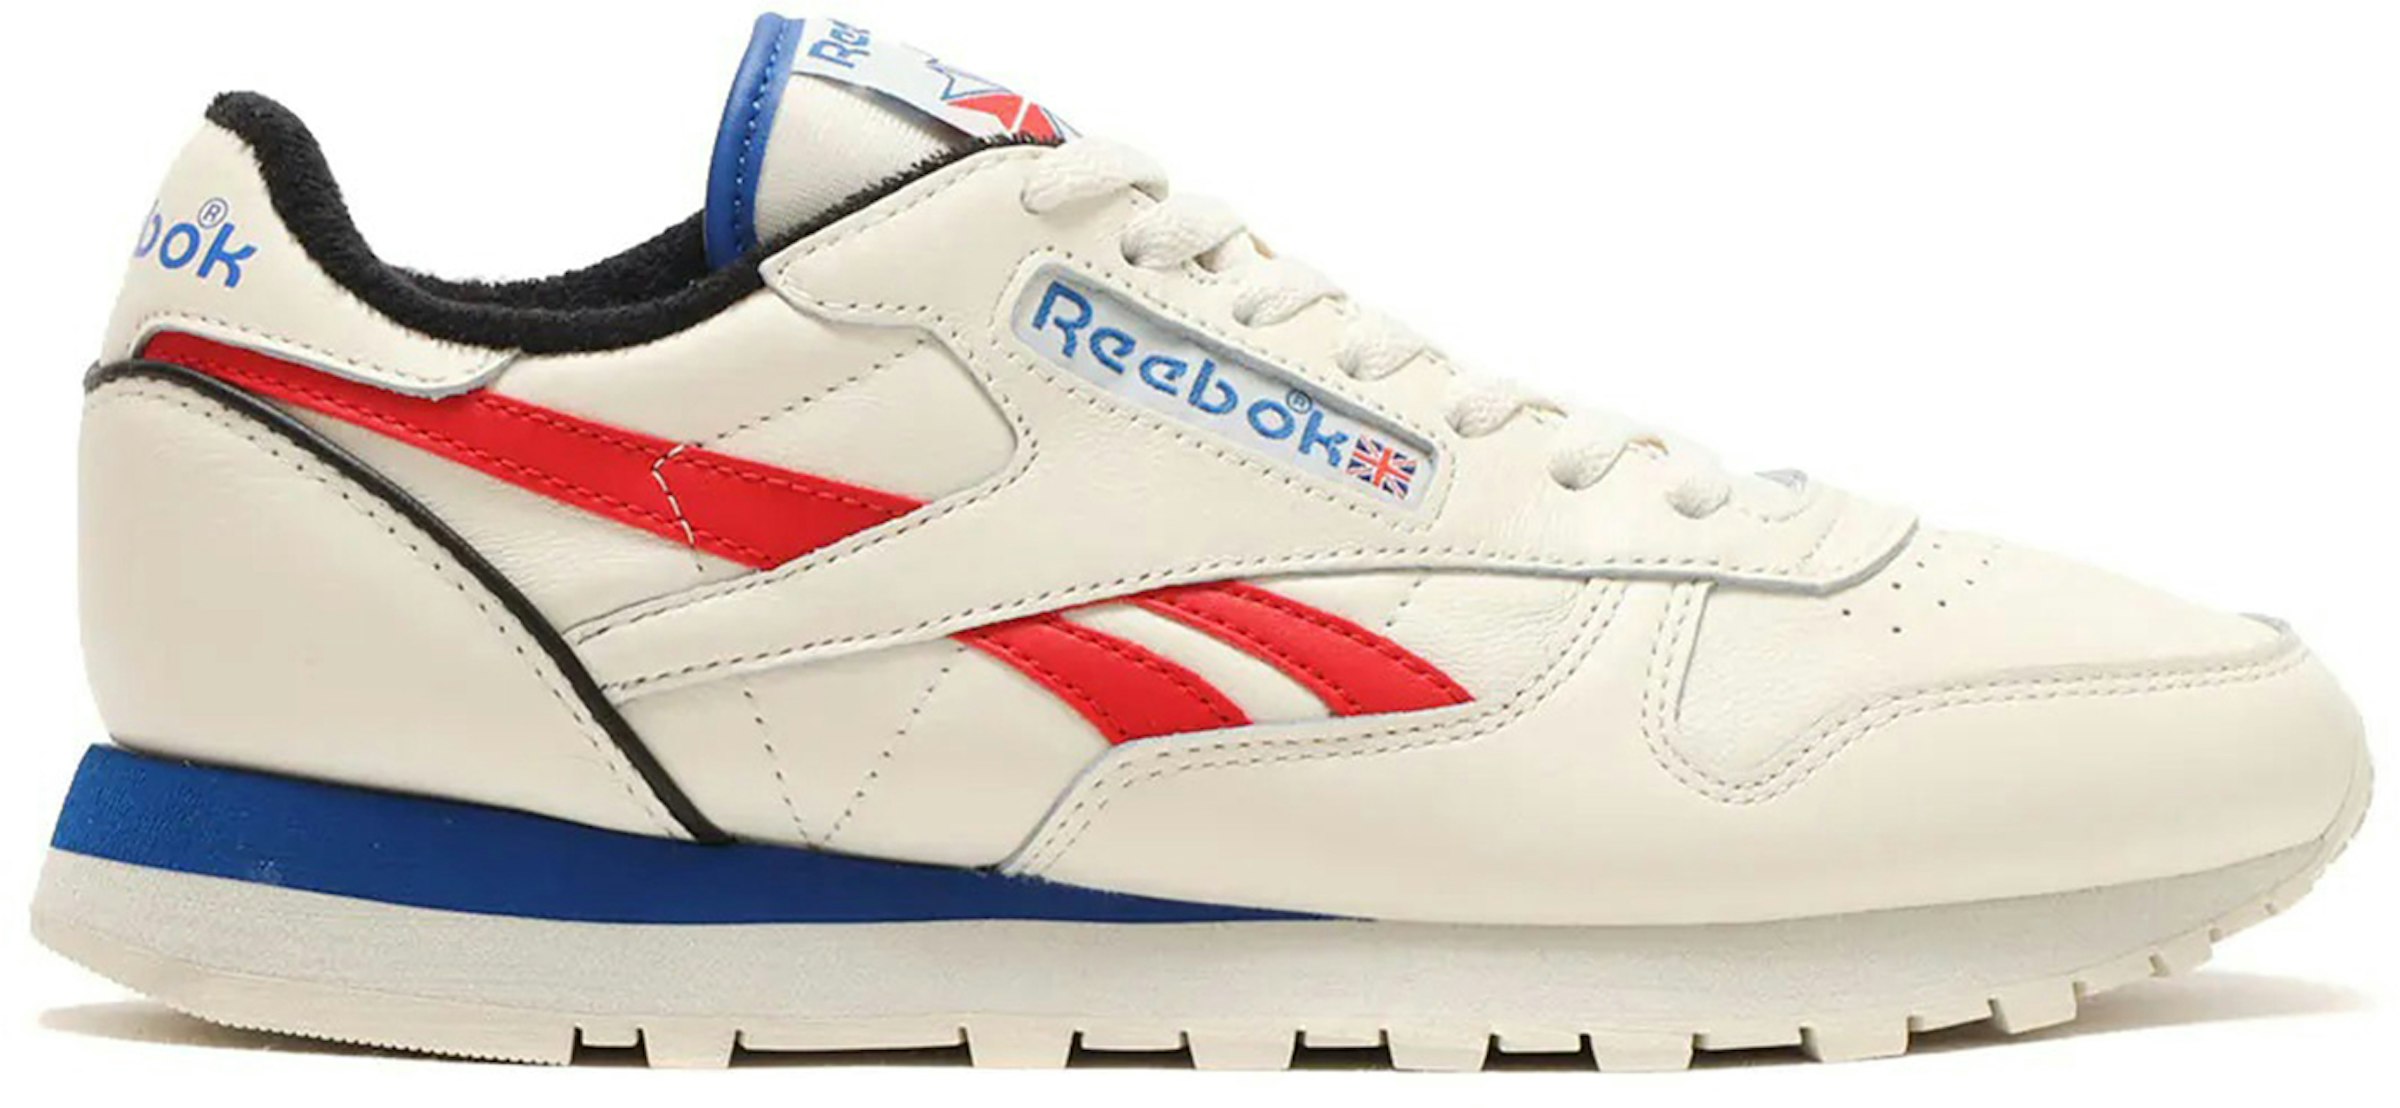 Componer montículo lema Reebok Classic Leather 1983 Vintage White Blue Red Men's - GY4114 - US